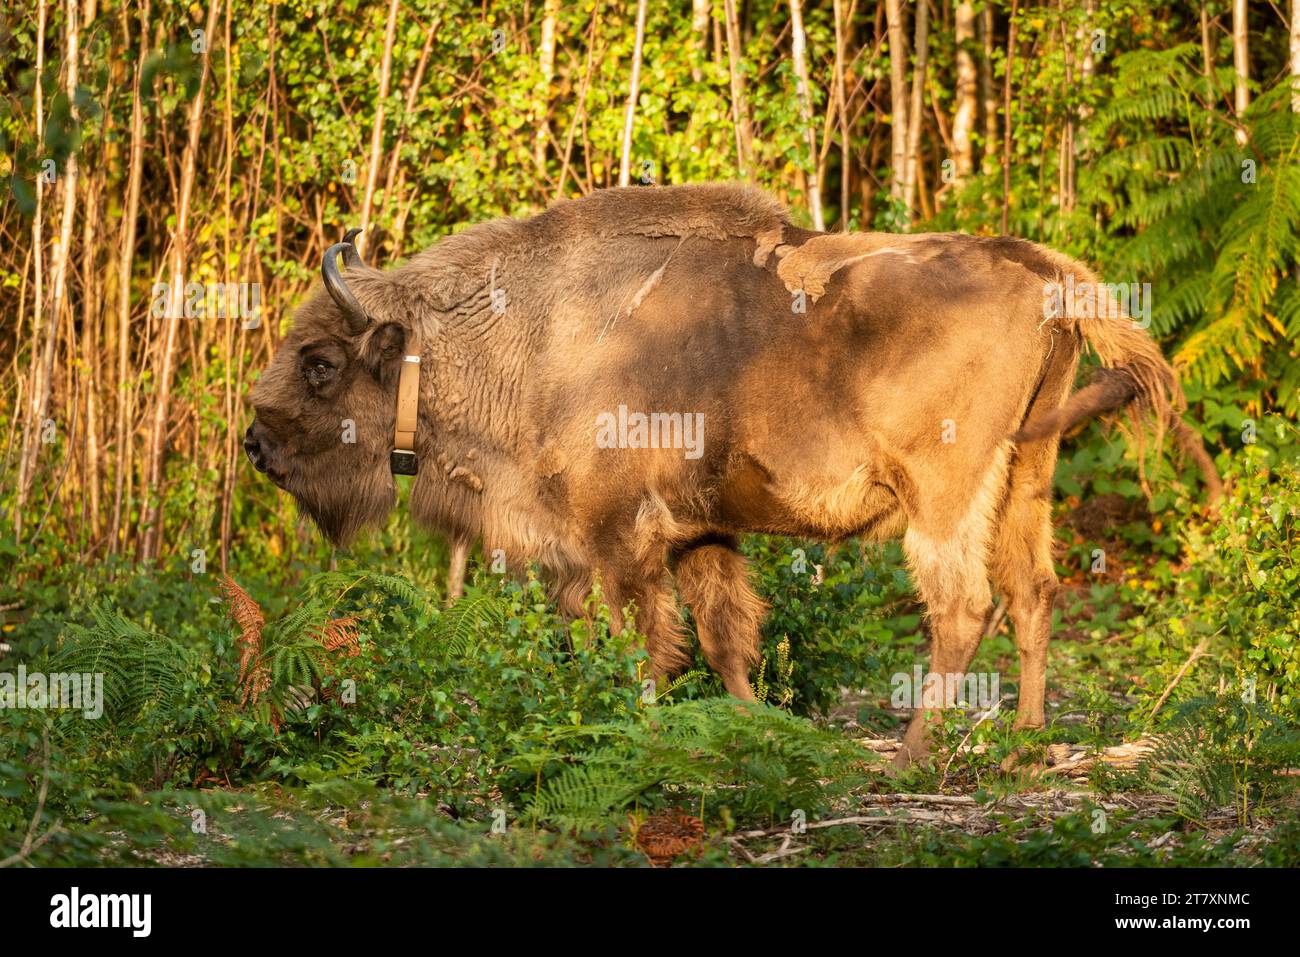 European Bison (Bison bonasus), female (cow), being released into woodland as part of the Wilder Blean project, Kent, England, United Kingdom, Europe Stock Photo